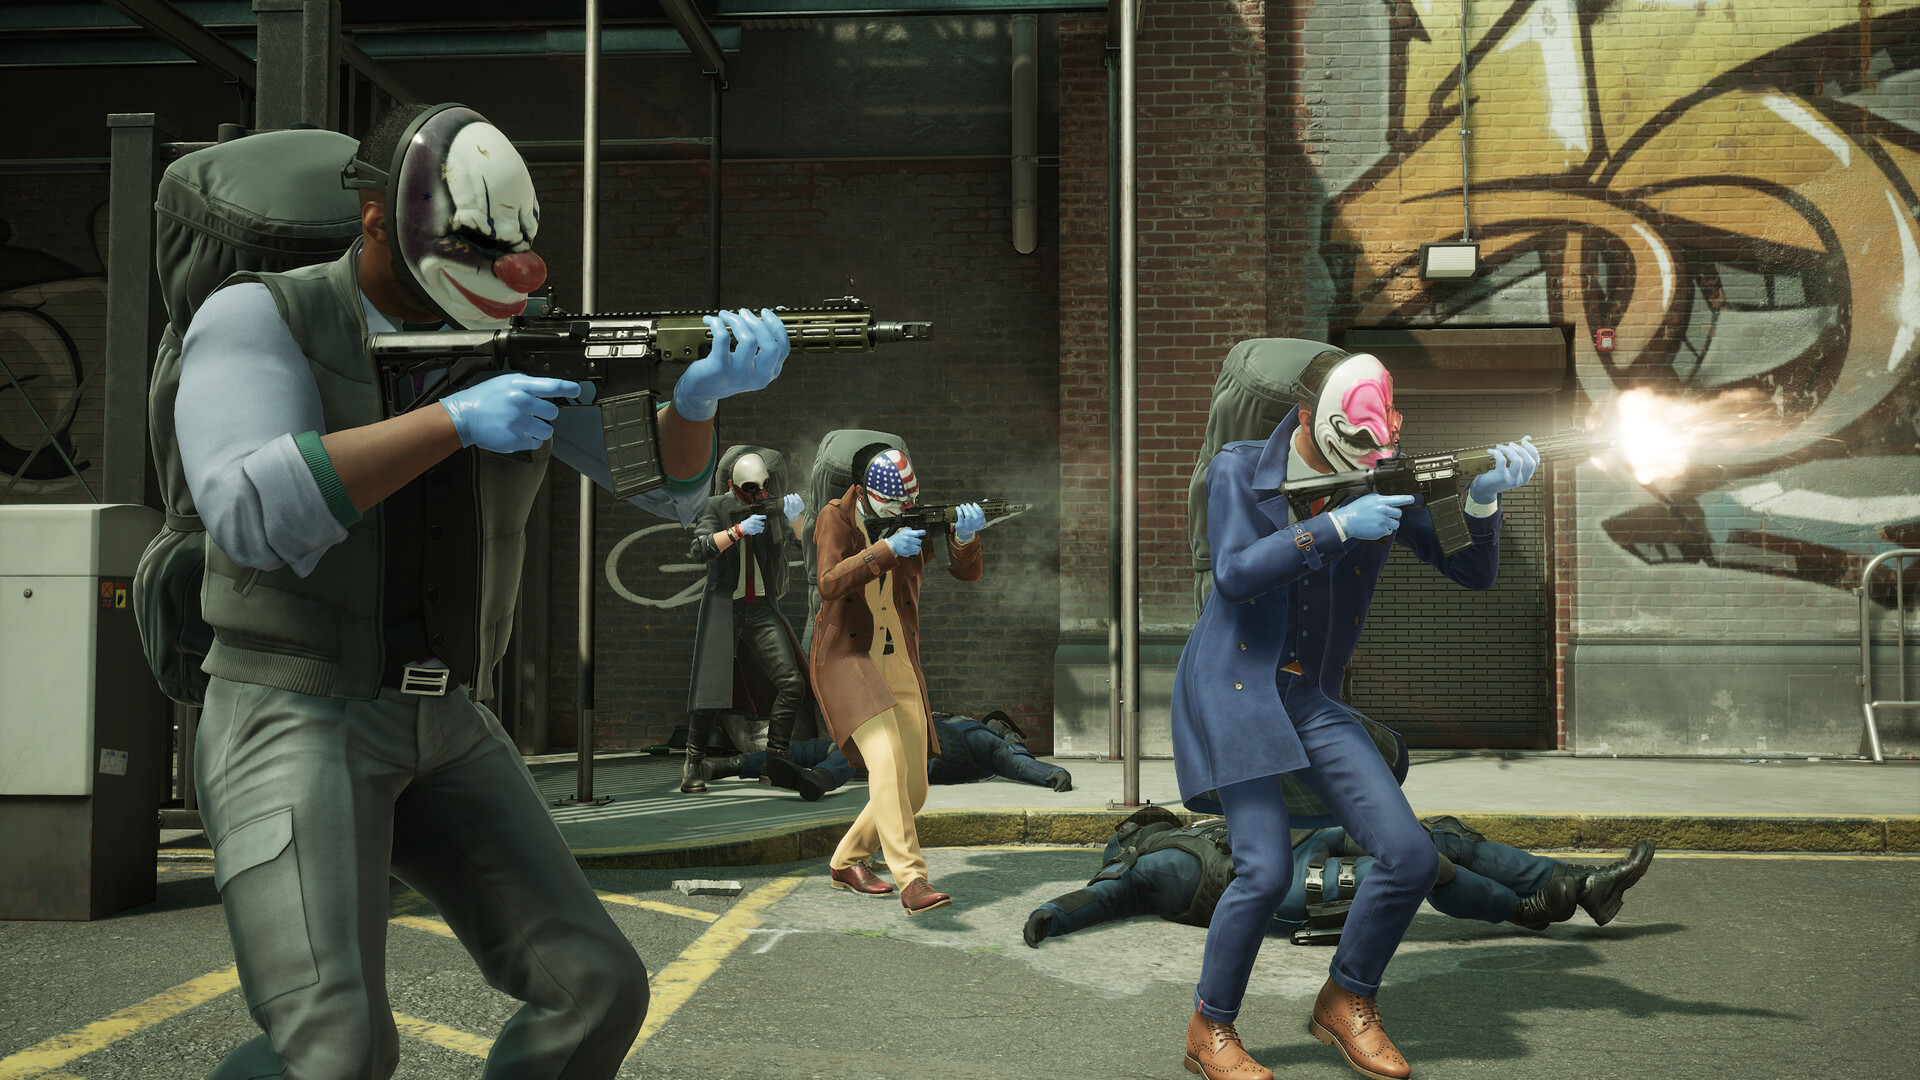 Payday 3 Has Four Difficulty Options, Overkill Will be “Brutal” and “Unfair”